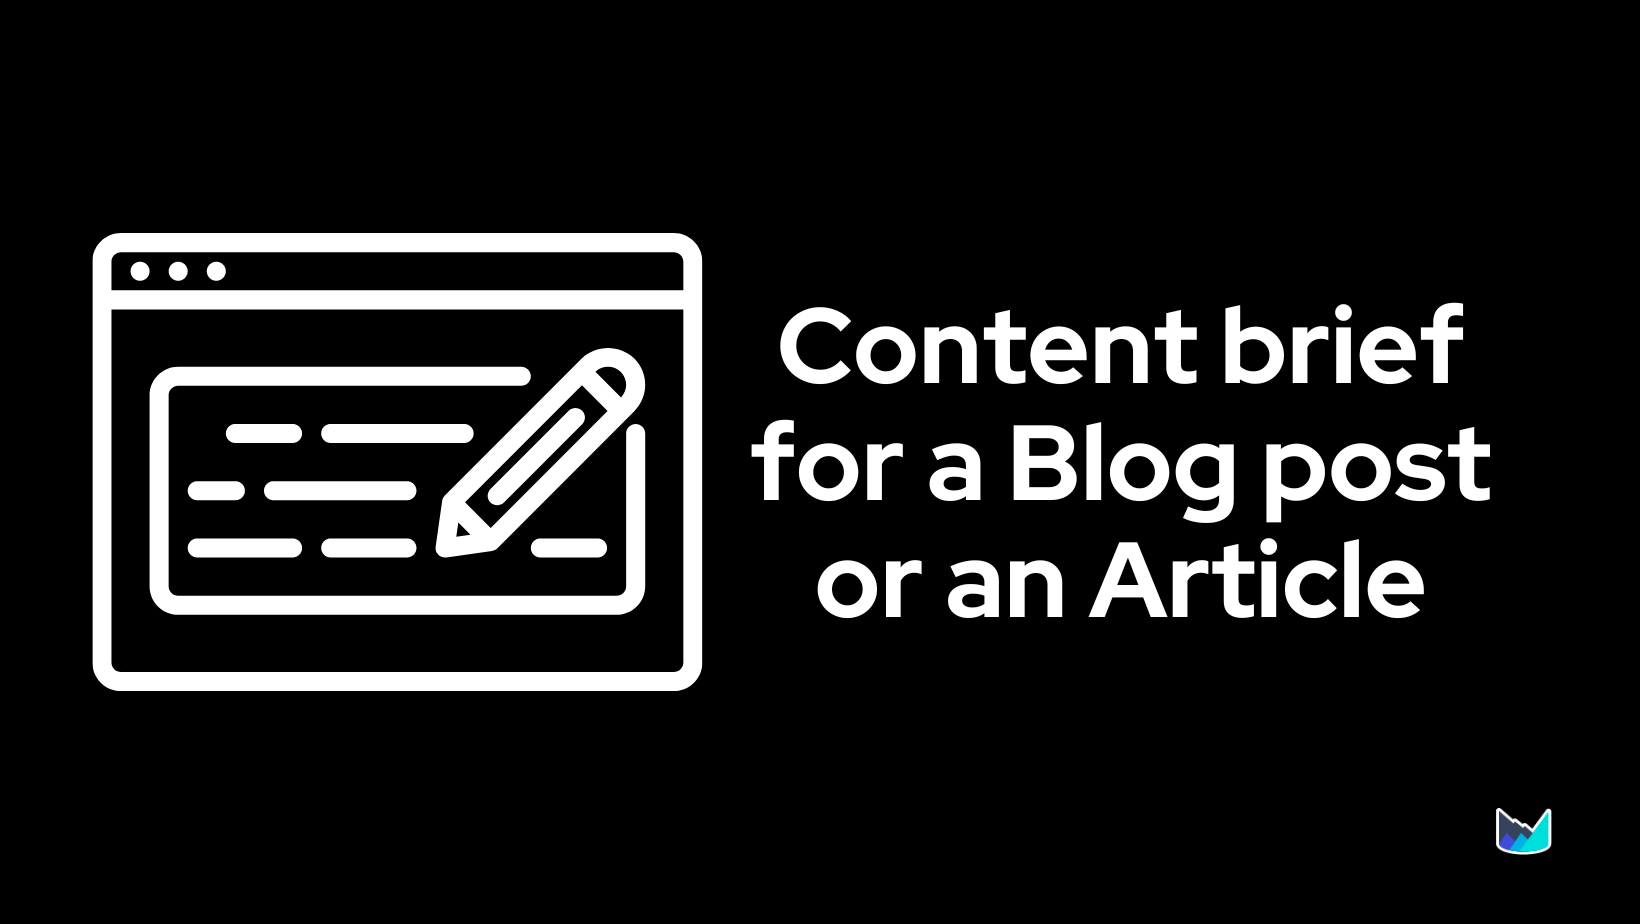 The Ultimate Content Brief Generator: Templates, Tools, and Outlines for Writing Blog Posts